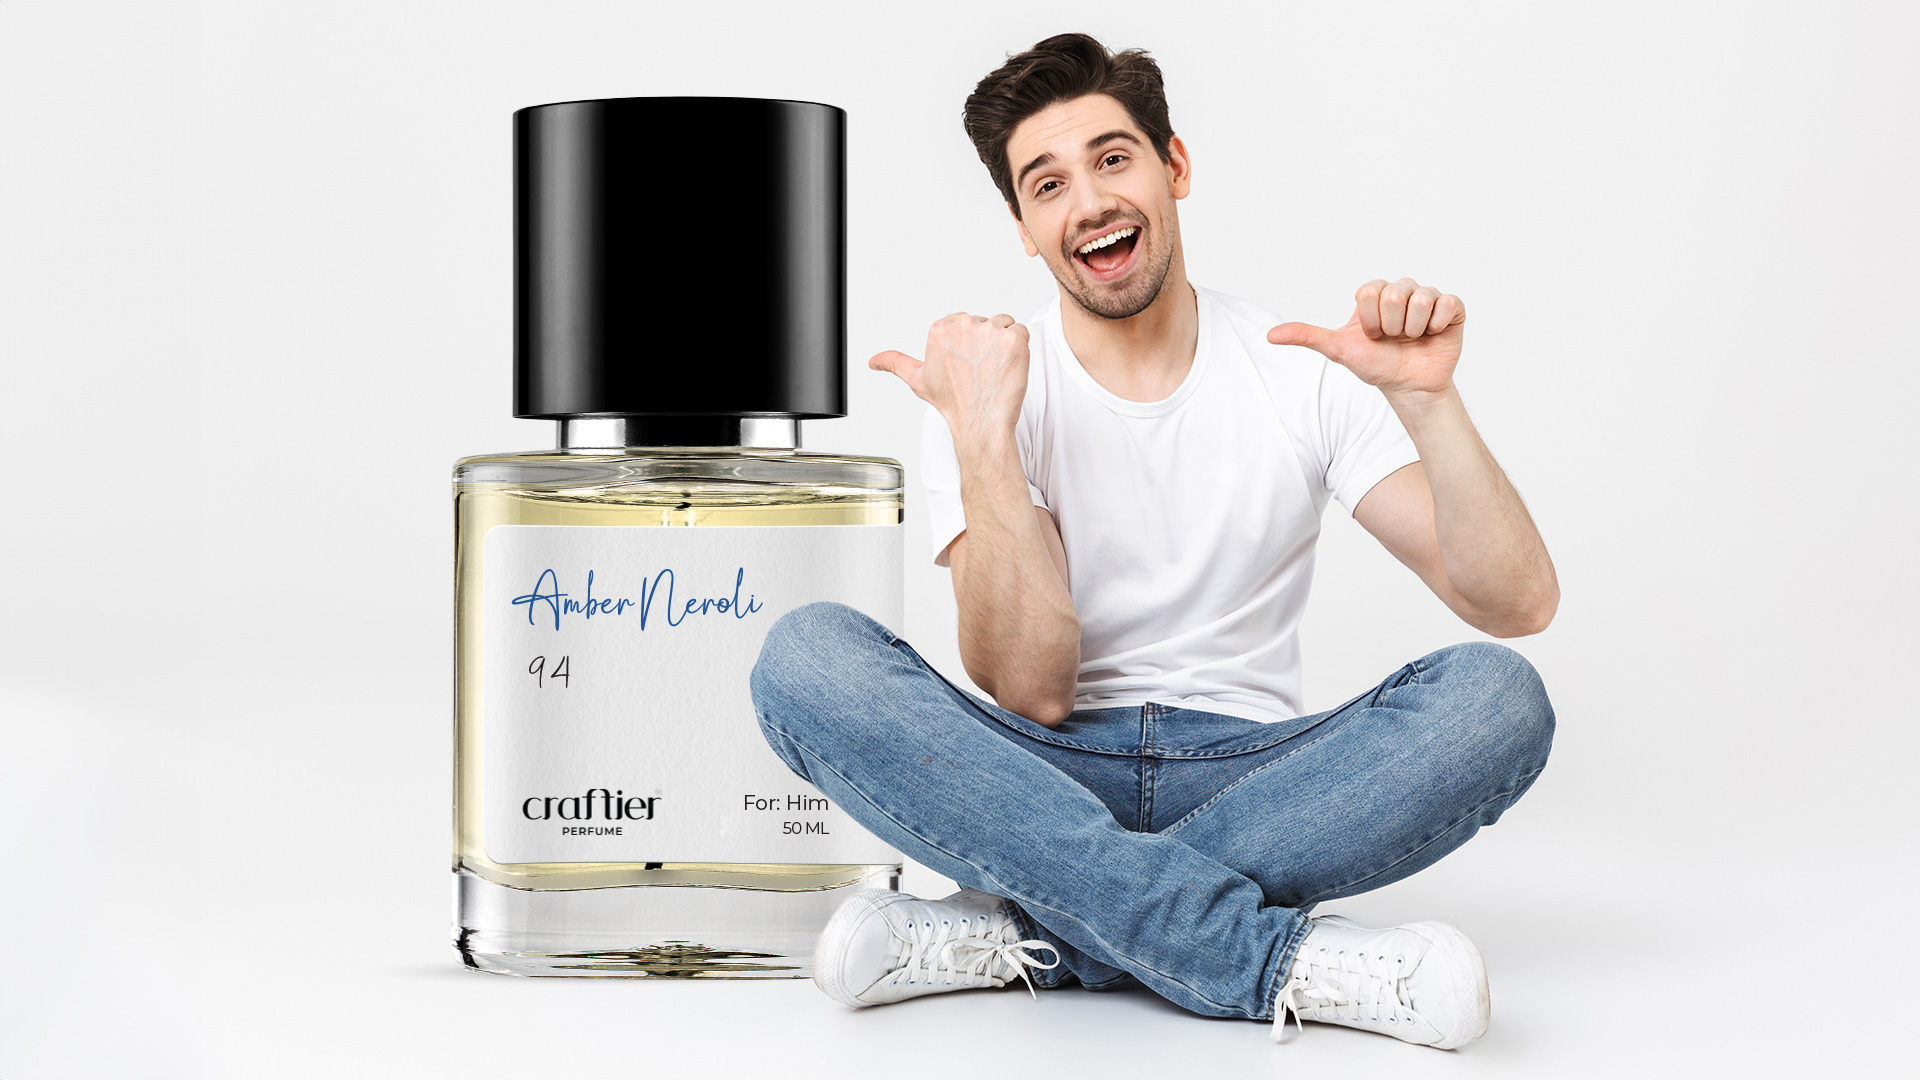 Get Ready to Be Noticed with the Best Branded Perfumes for Men at Cheaper Prices ​